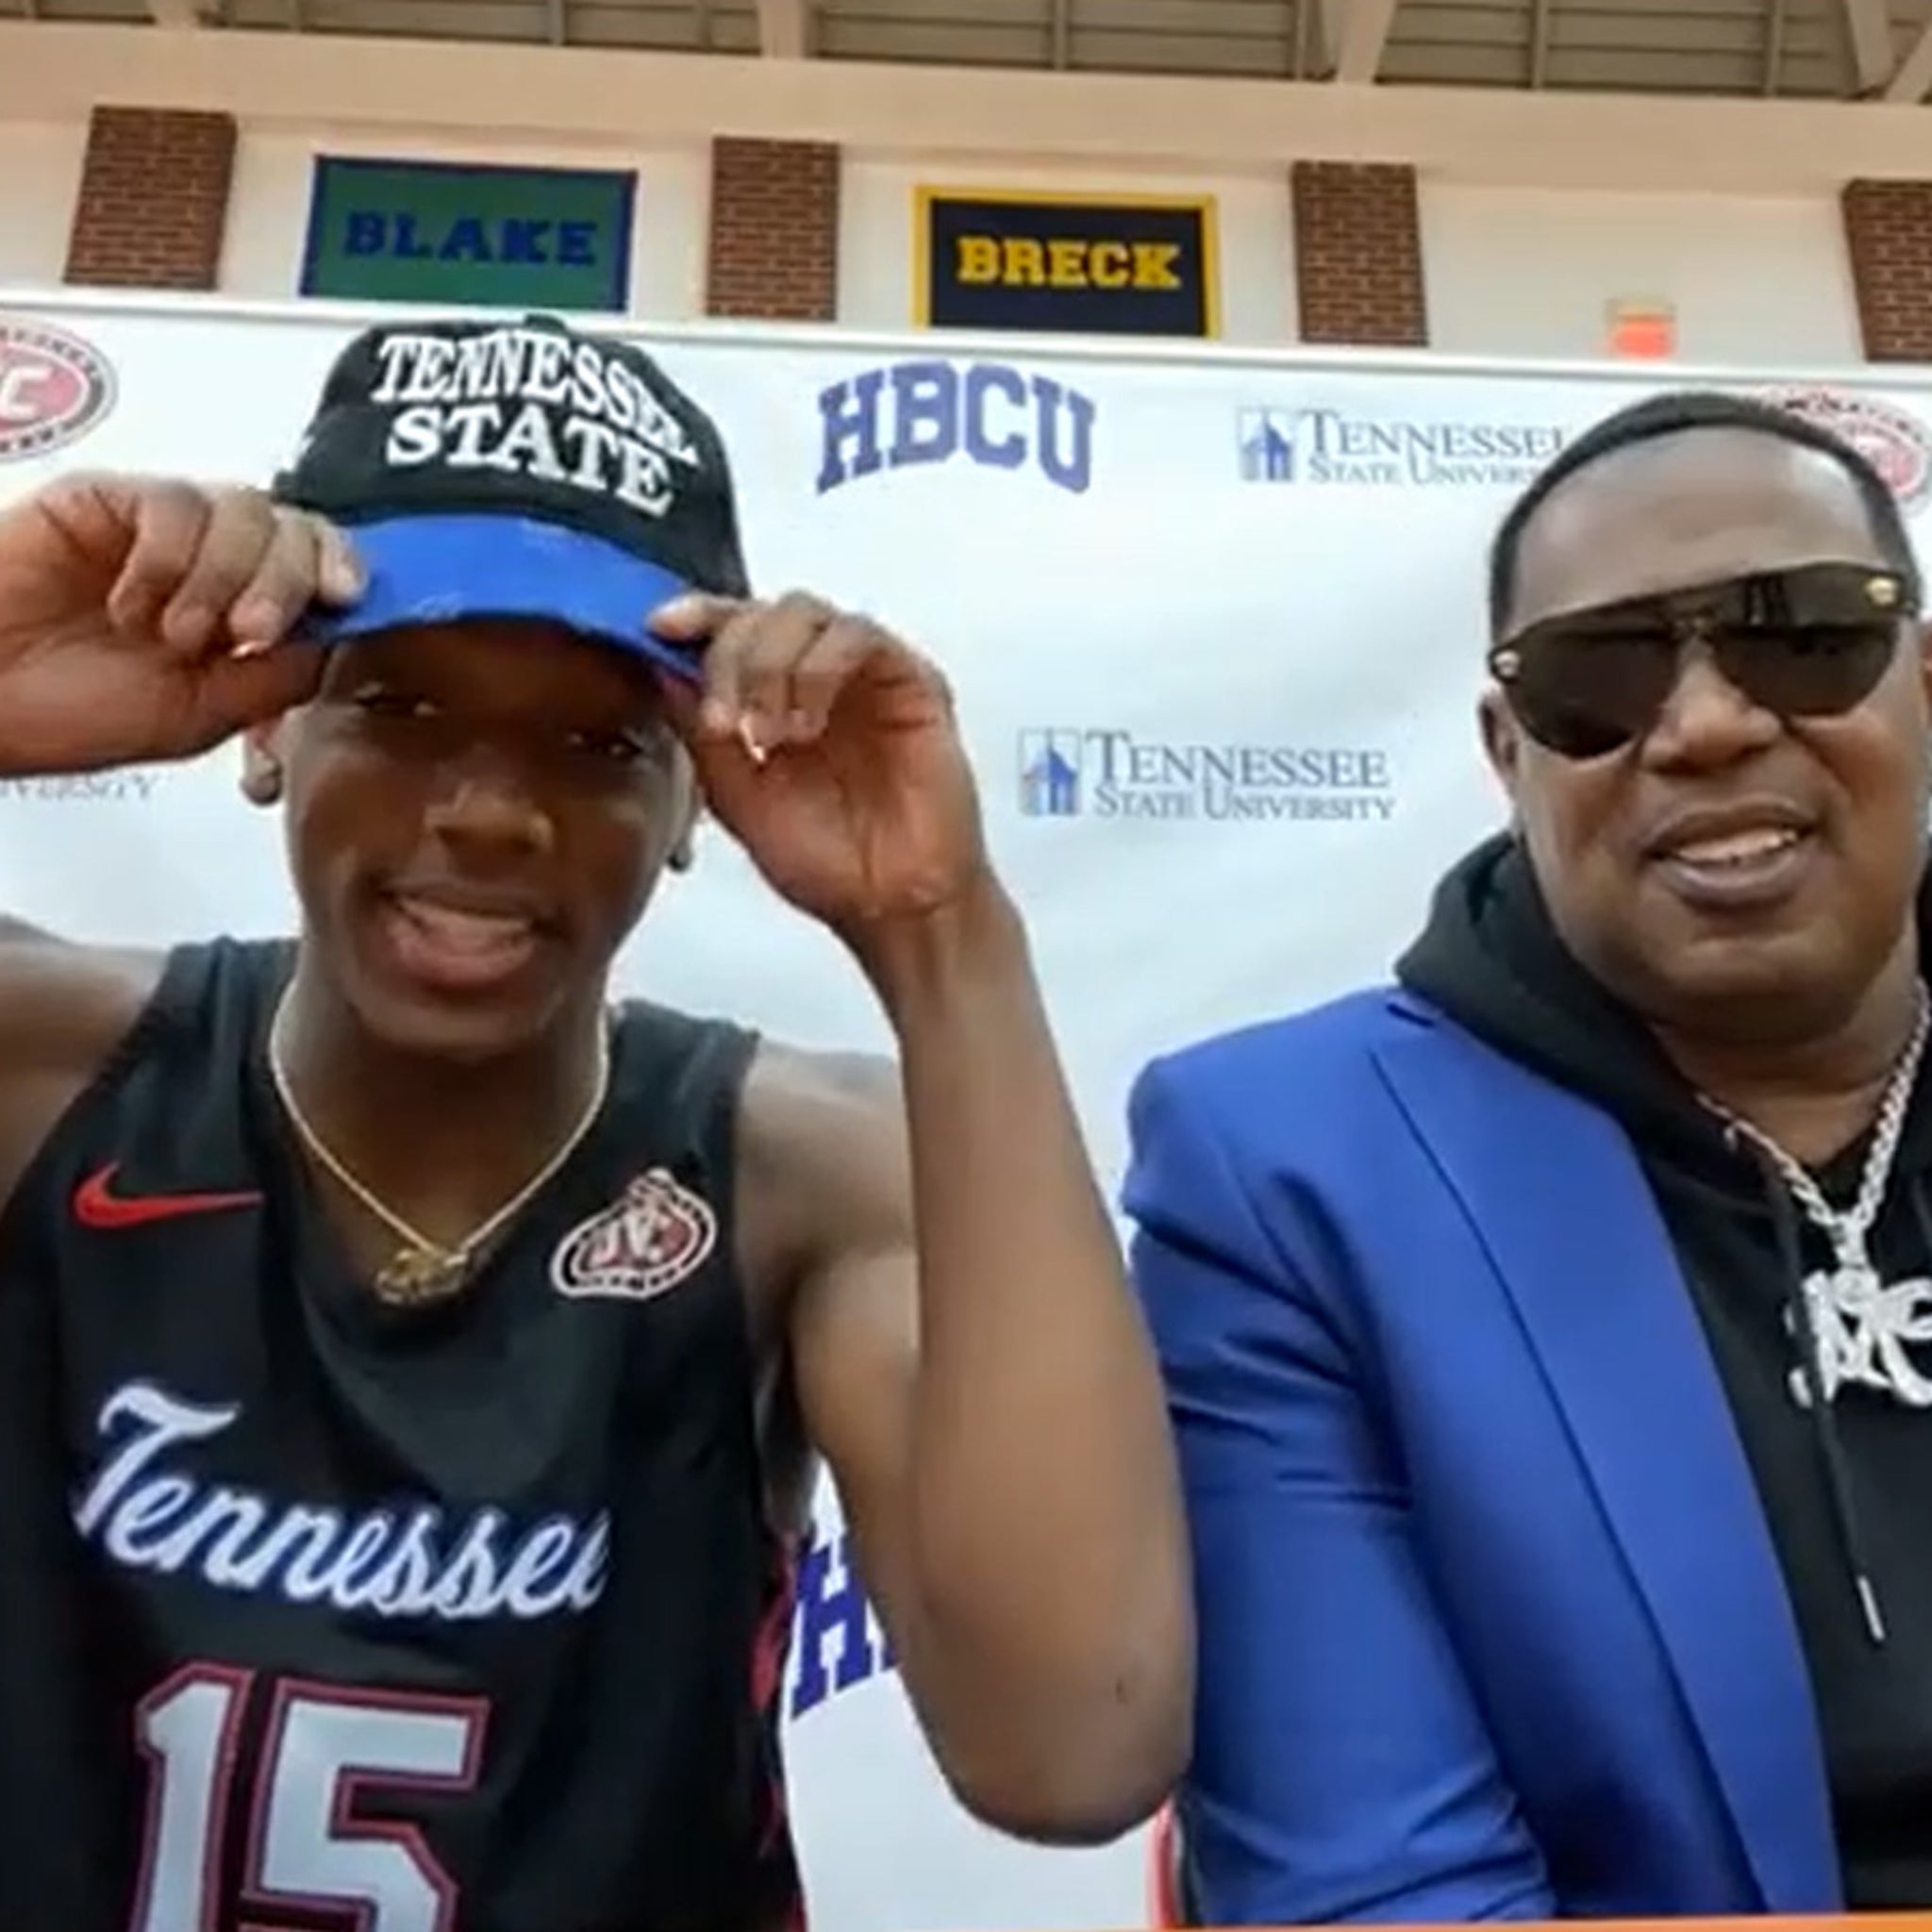 Point guard Hercy Miller, son of rapper Master P, includes Arizona